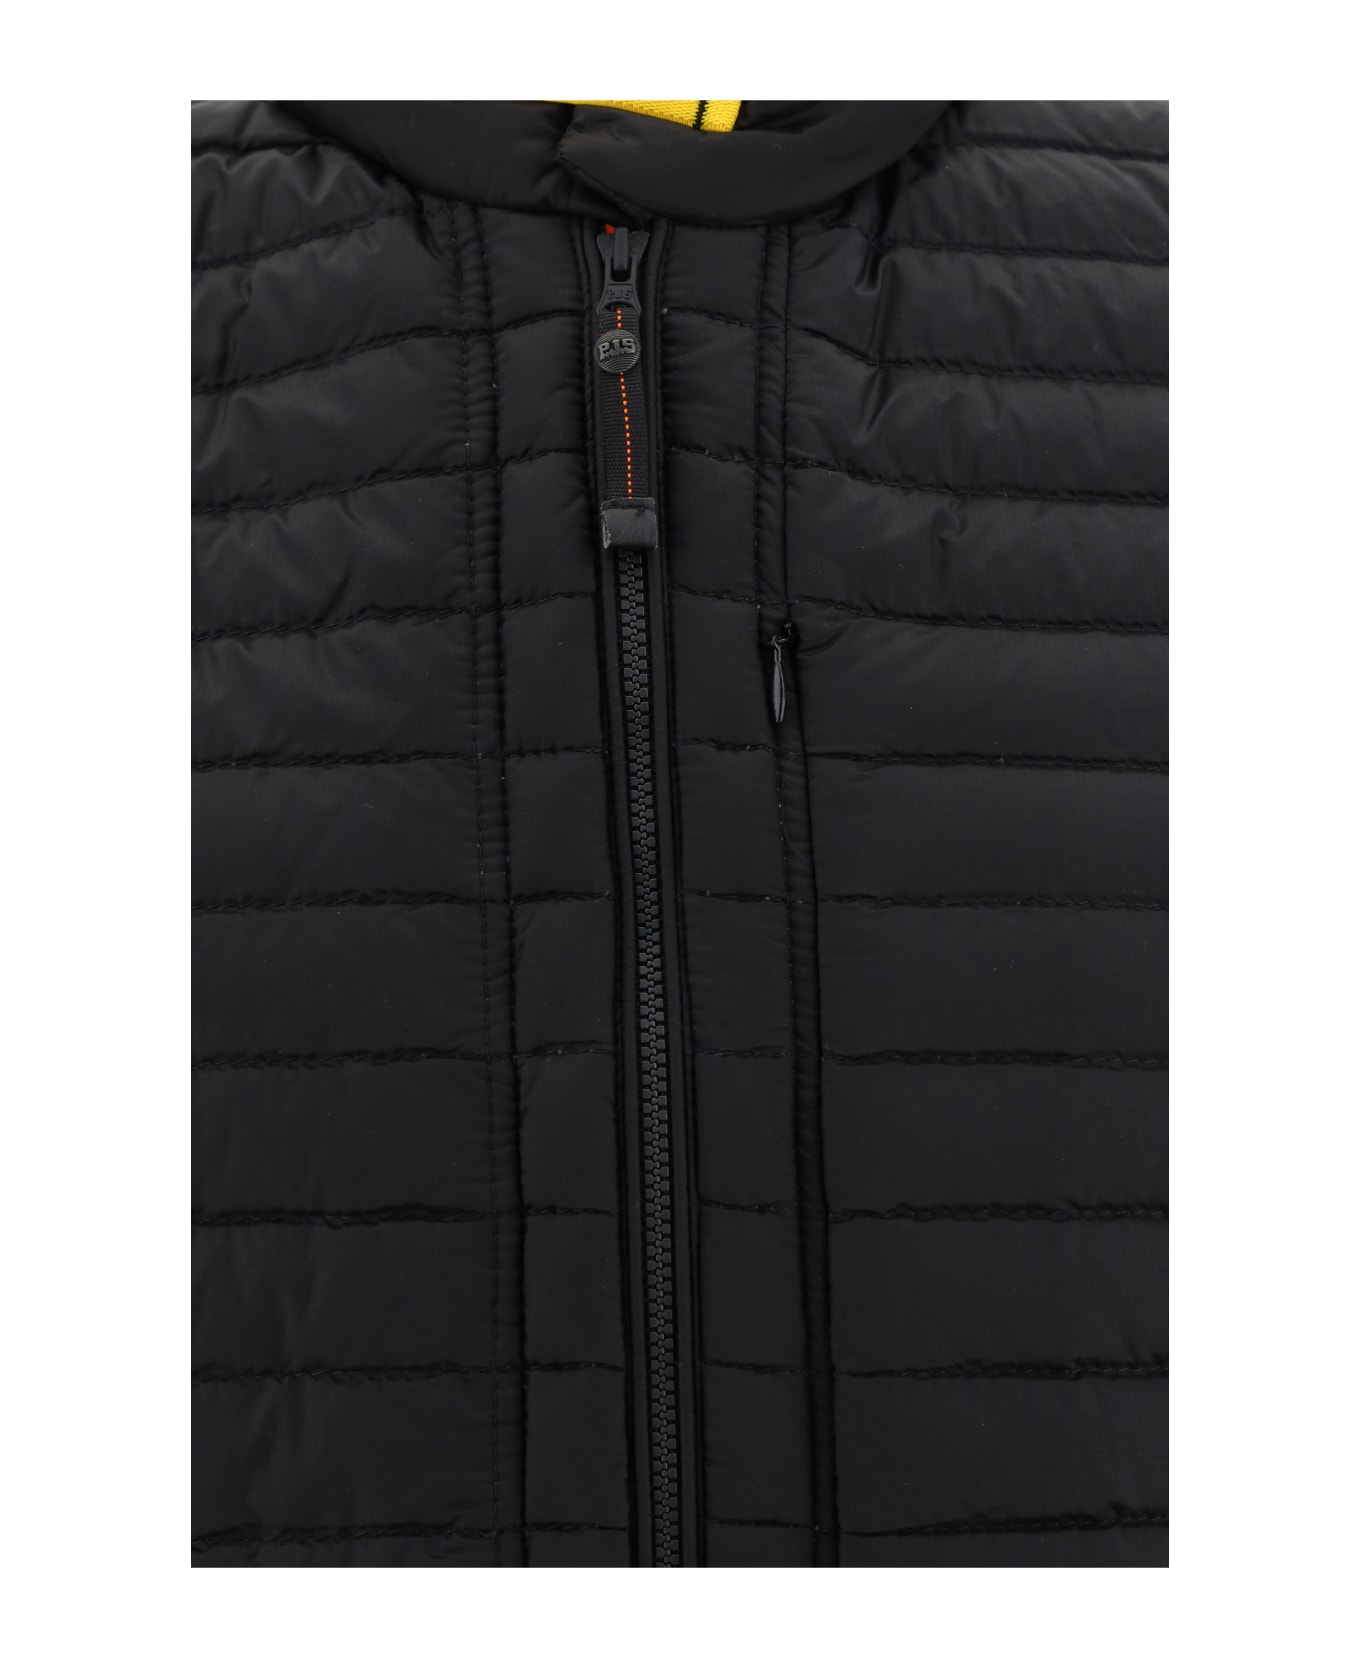 Parajumpers Gino Down Vest - Black